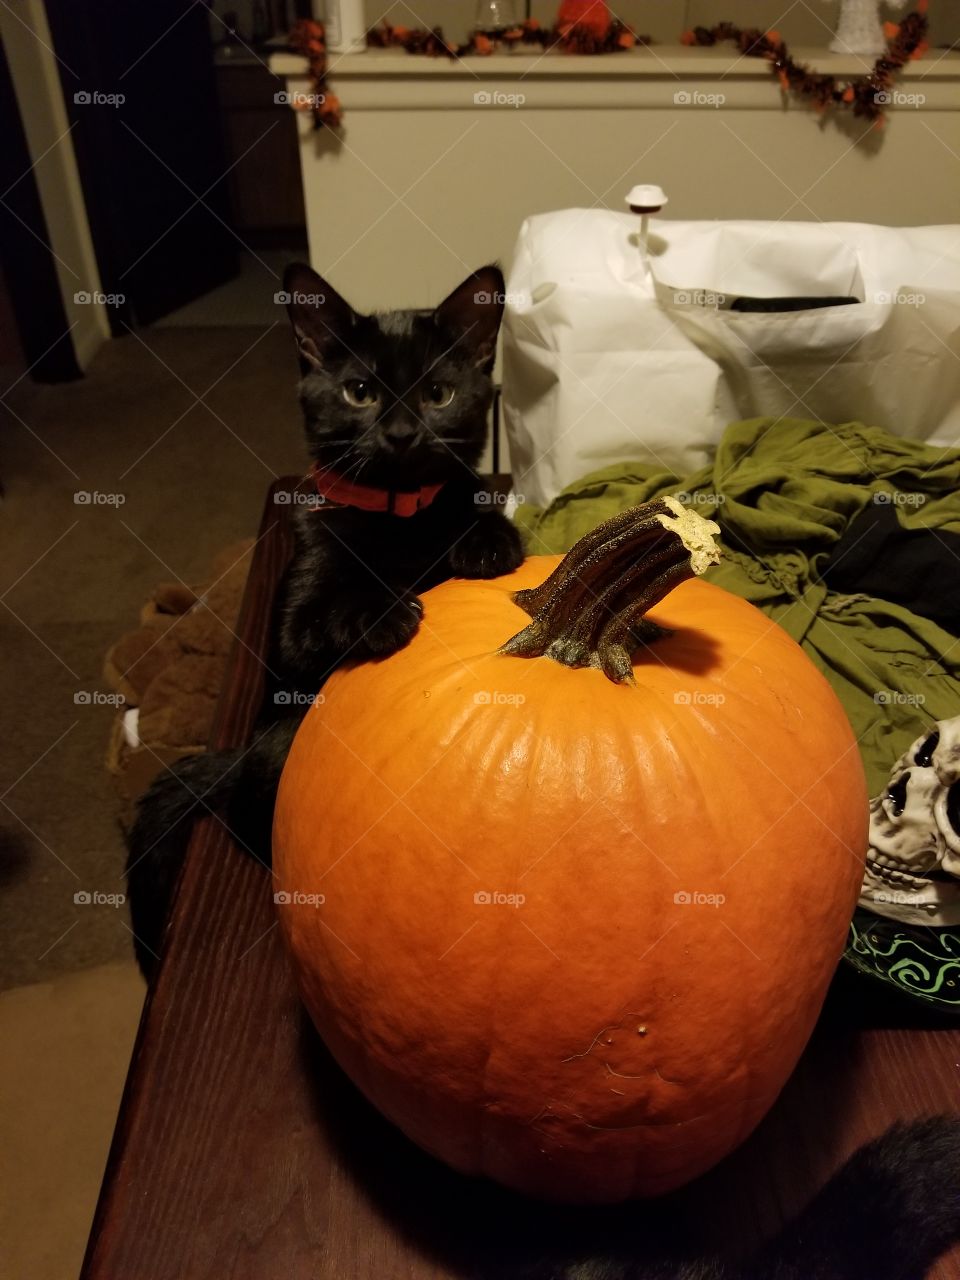 this is my pumpkin!